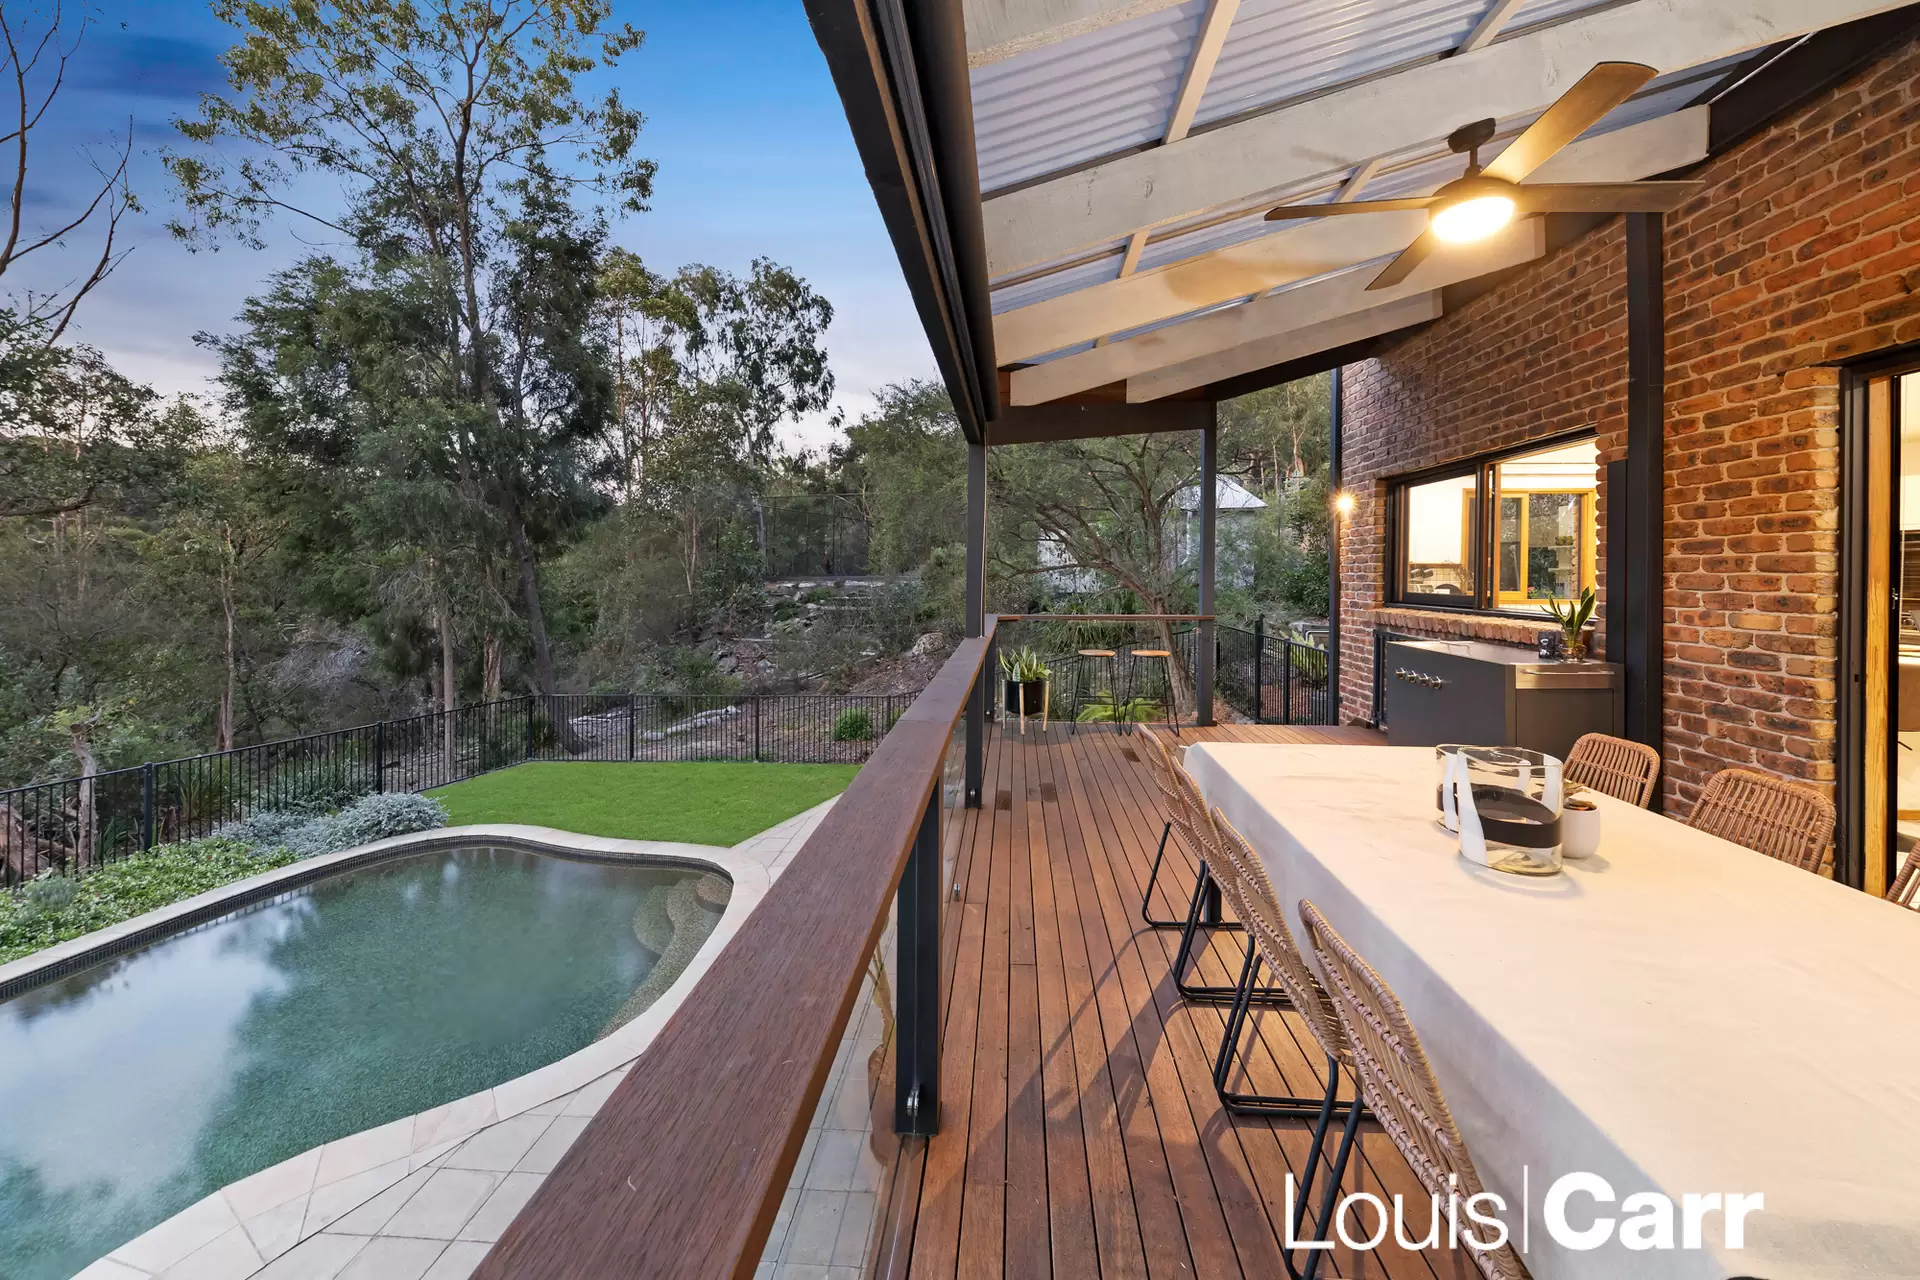 Photo #14: 11 Araluen Place, Glenhaven - Sold by Louis Carr Real Estate